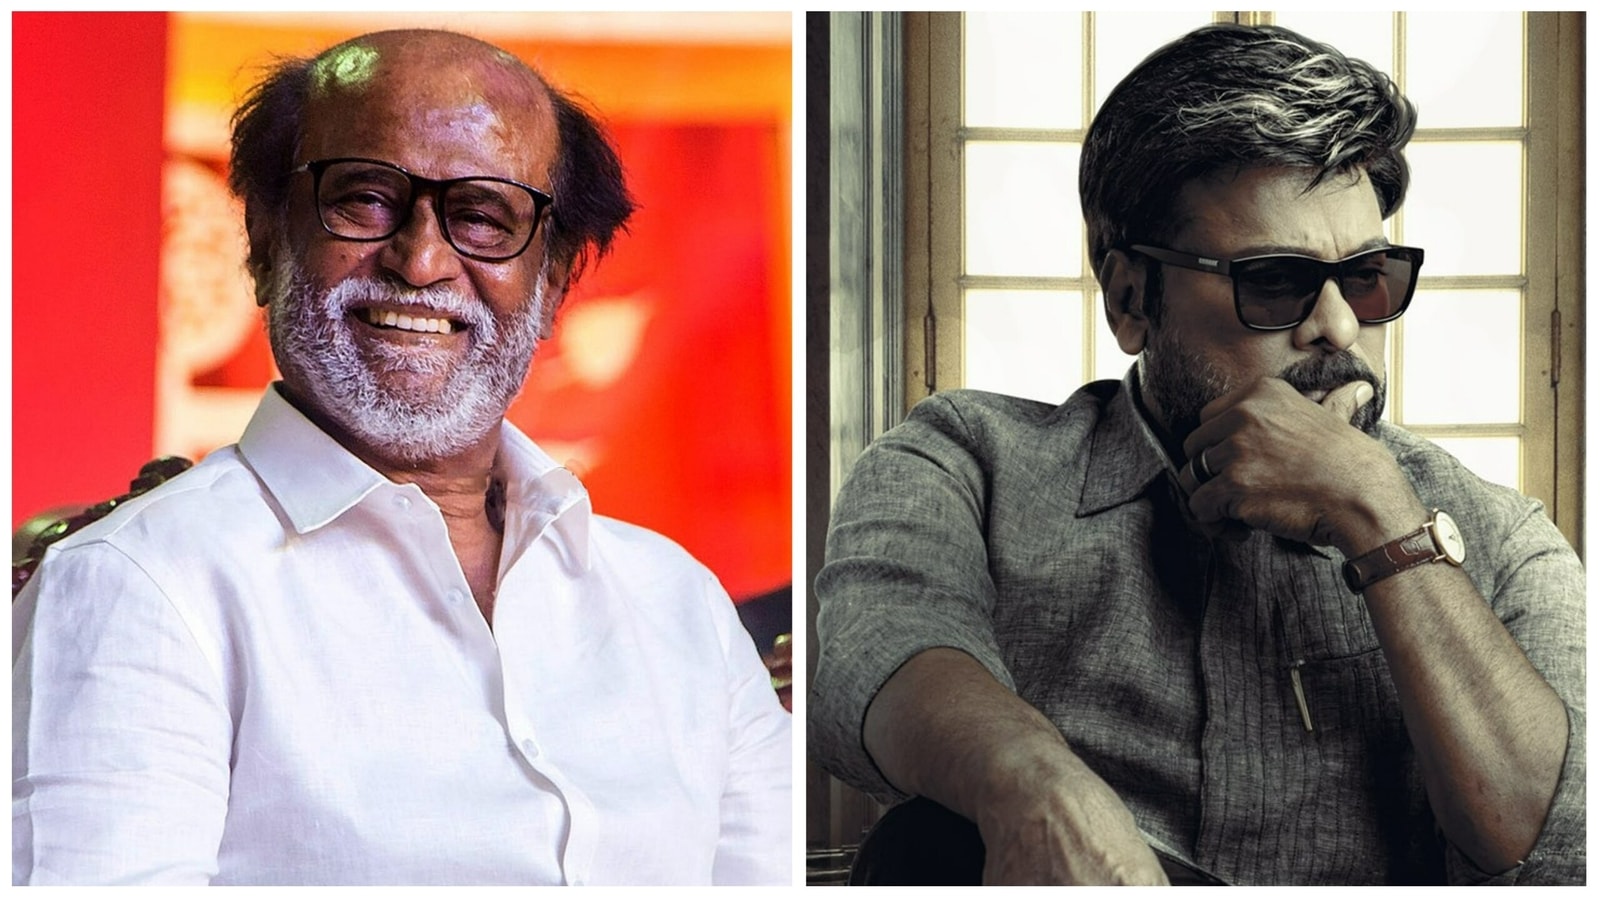 Rajinikanth calls Chiranjeevi’s GodFather ‘excellent’, director Mohan Raja reacts: ‘One of the best moments of my life’